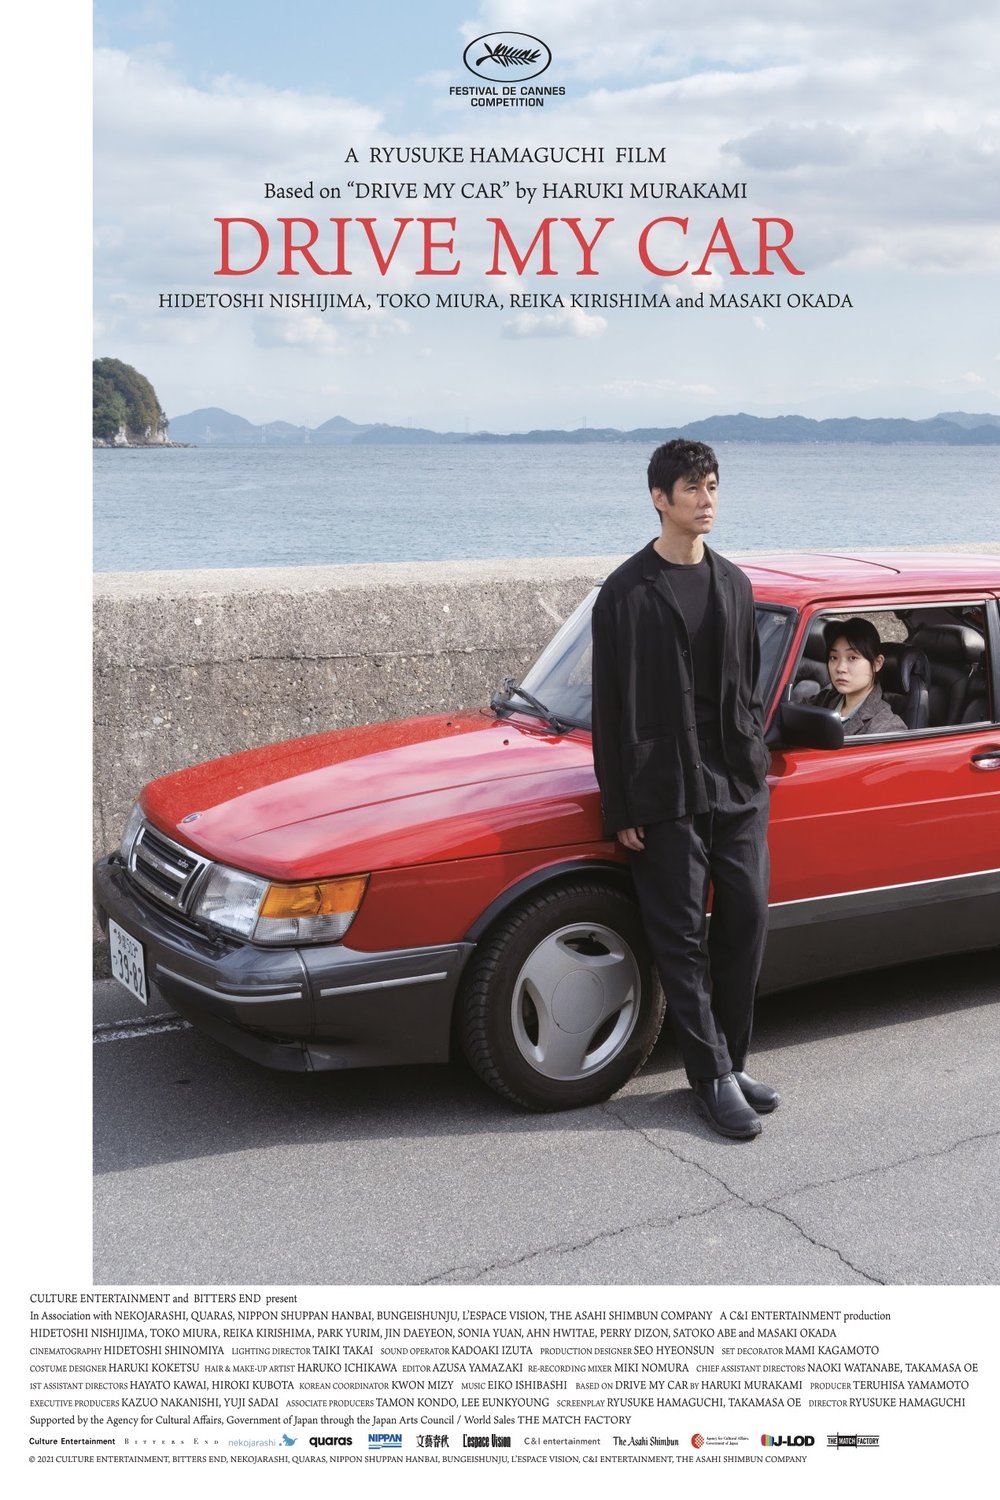 Japanese poster of the movie Drive My Car